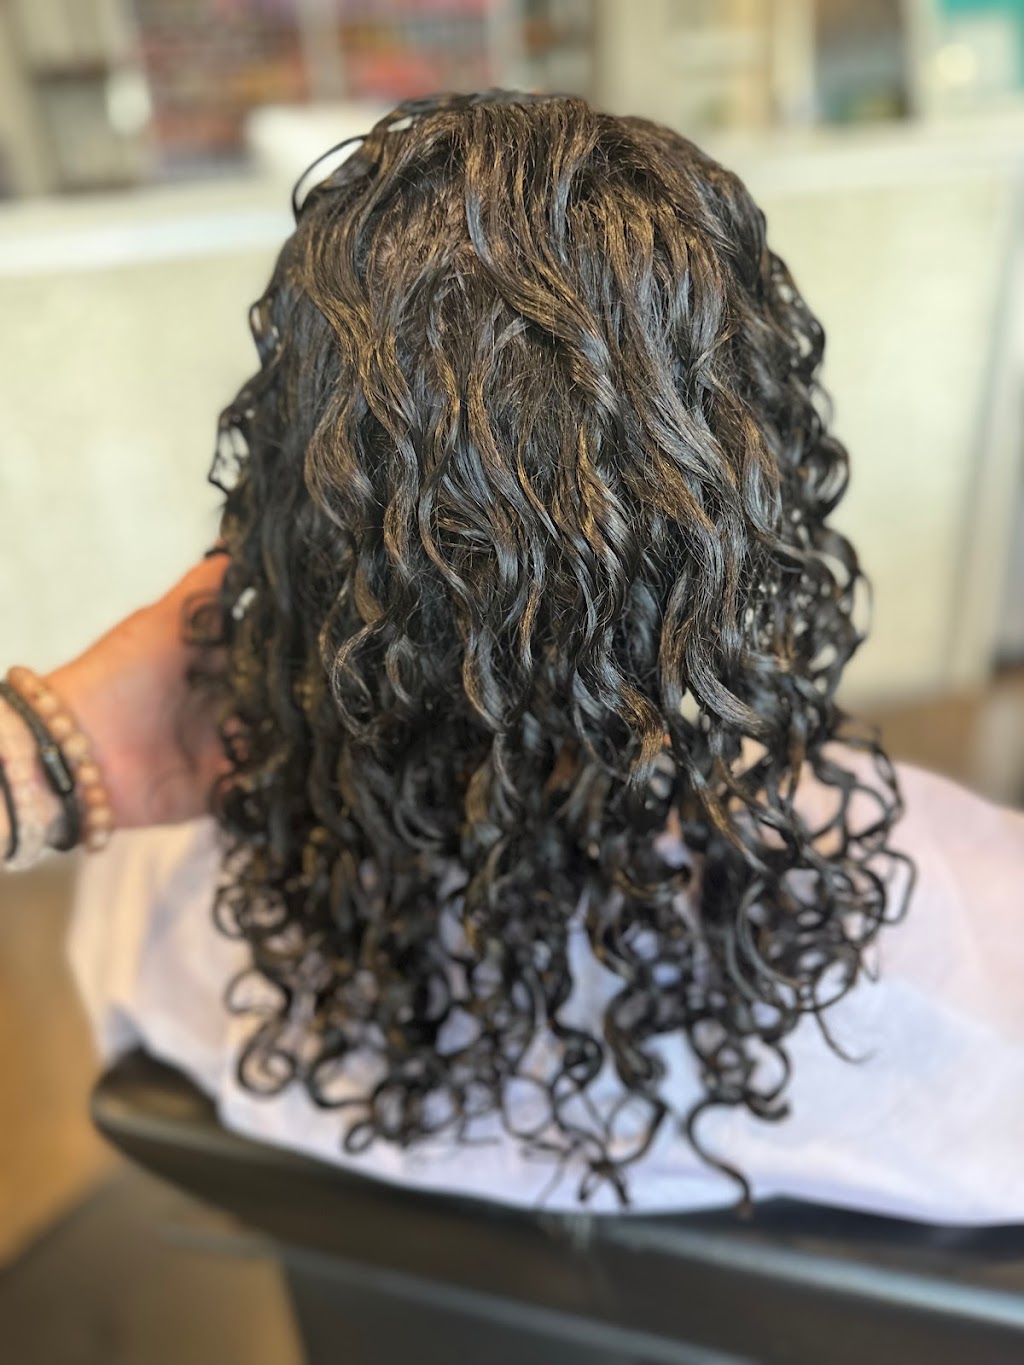 Beautiful From Head 2 Toe #BFH2T A Curly Hair Salon | 101 E Vineyard Ave Suite 111, Livermore, CA 94550 | Phone: (925) 371-6746